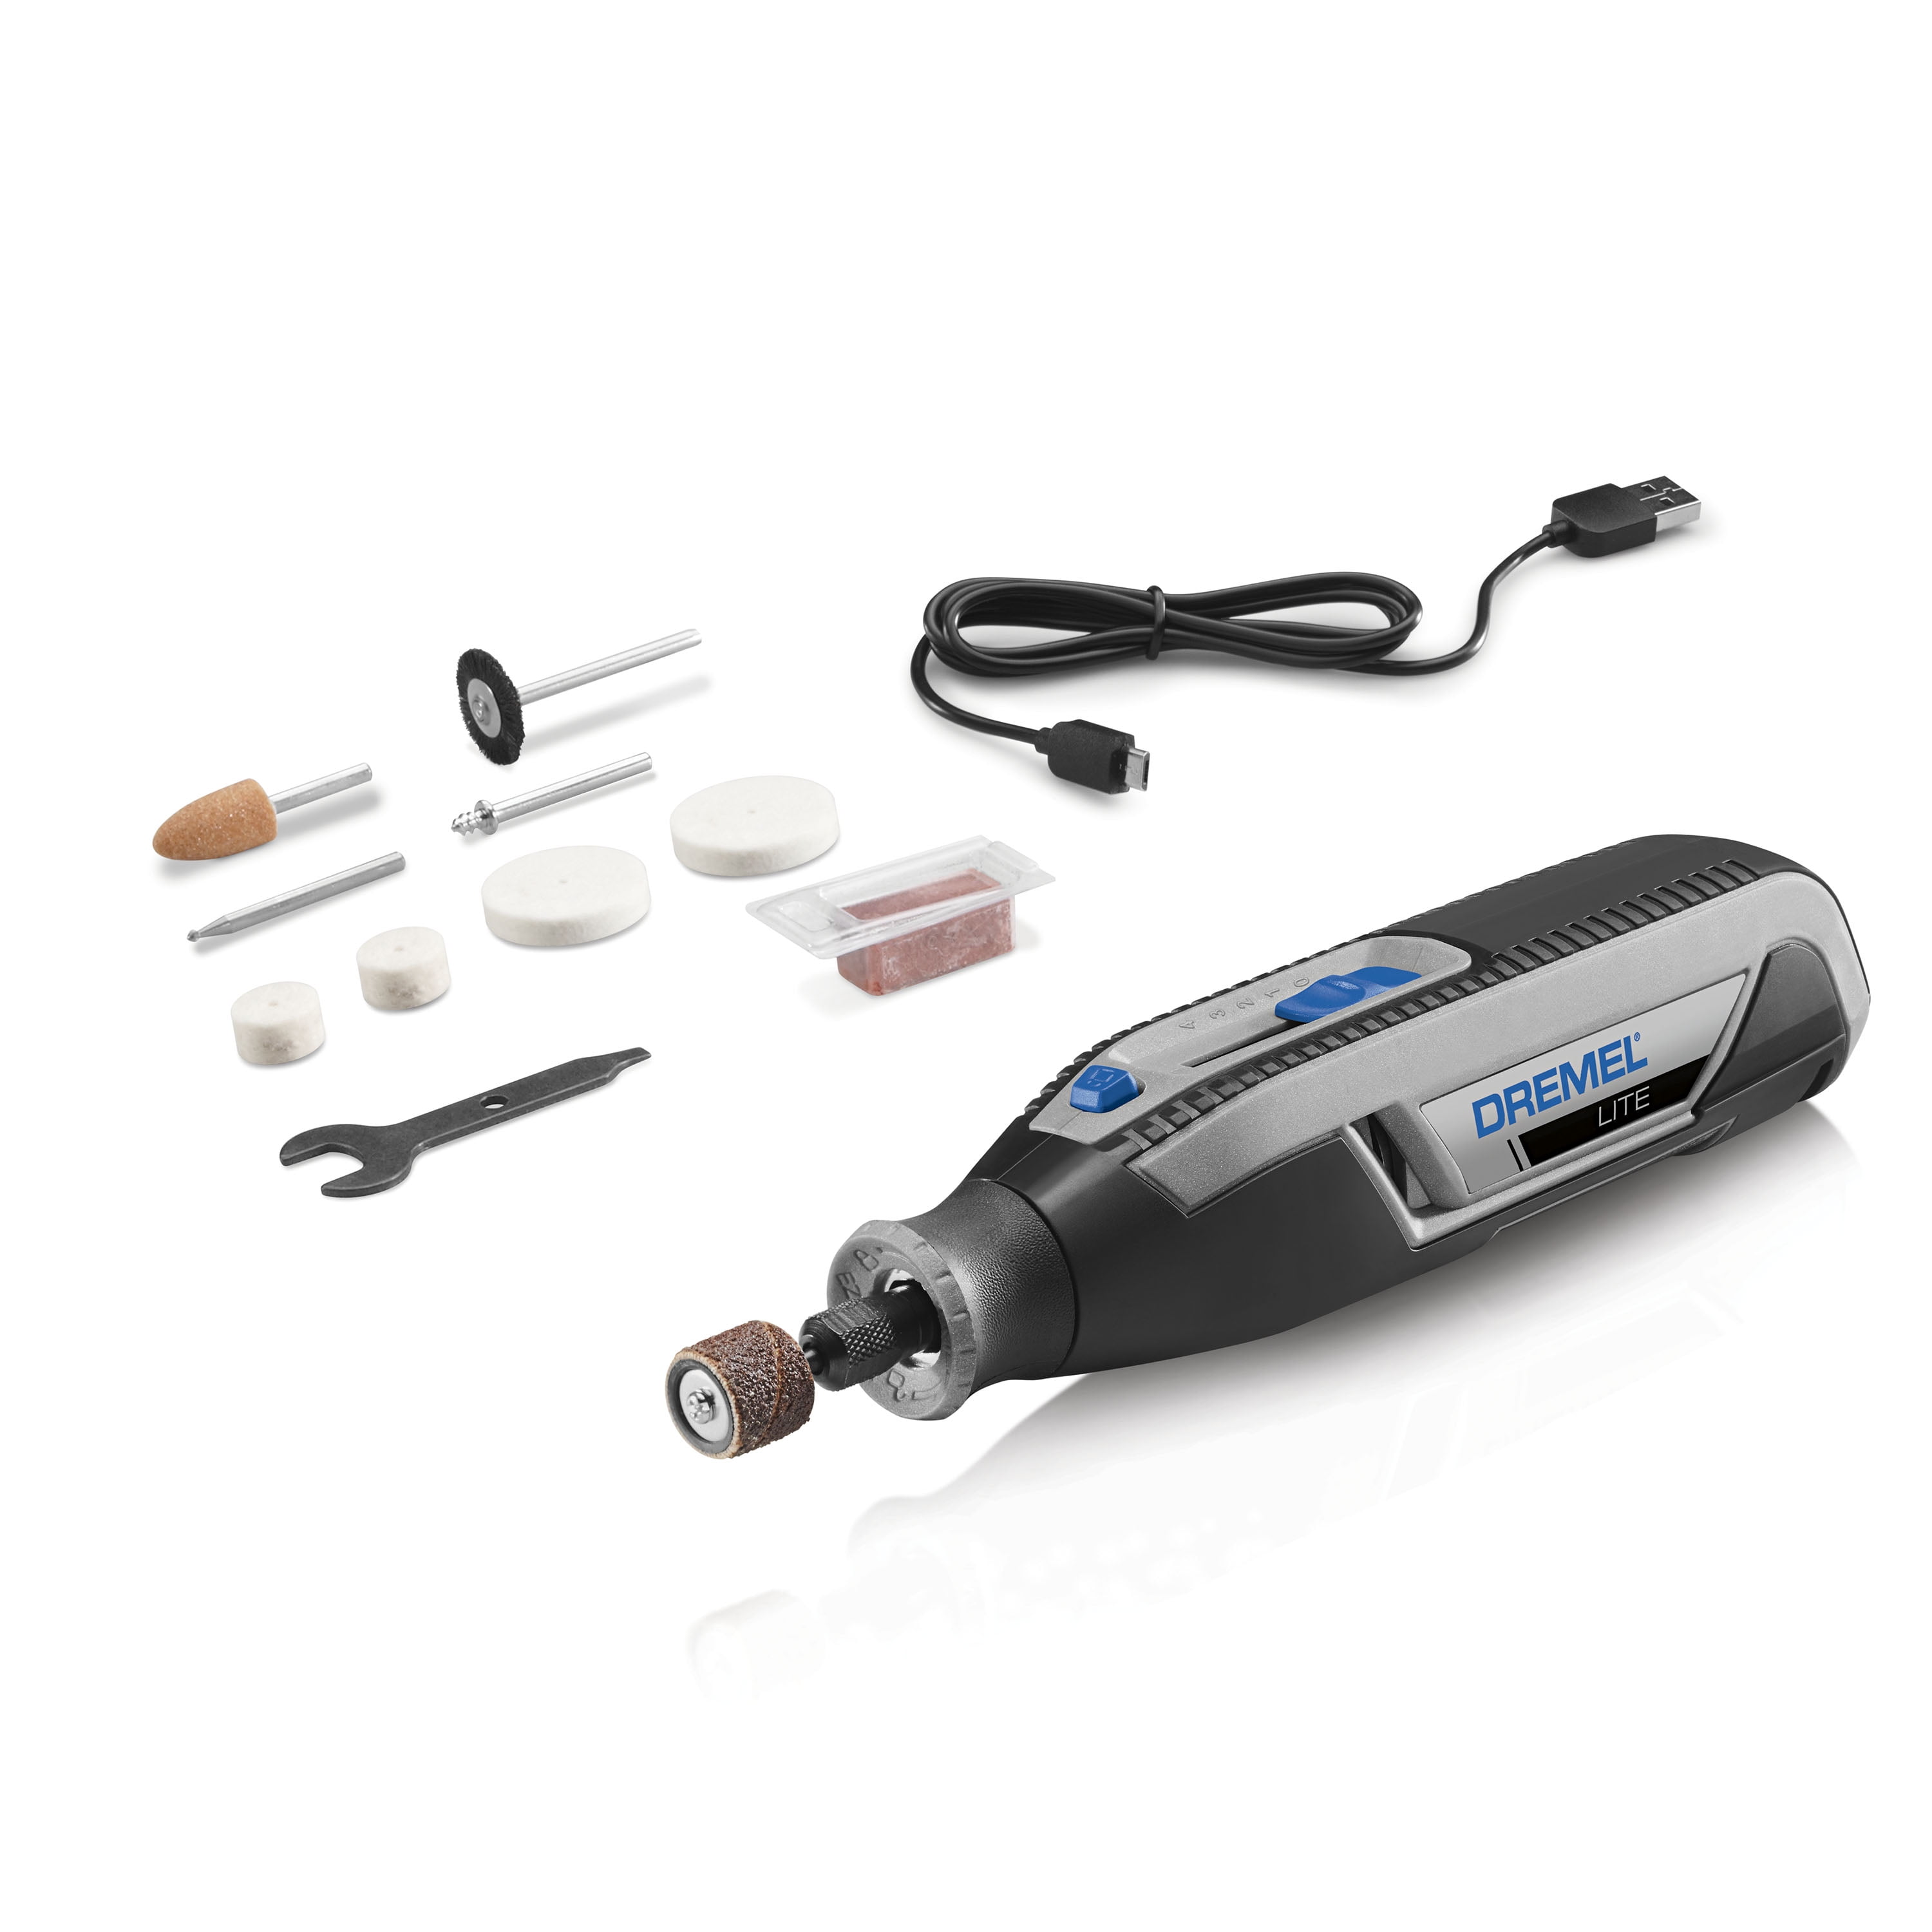 Dremel 8240 Cordless Rotary Tool Kit Battery Powered Wireless Angle Grinder  Dremel Complete Kit for Sanding Cutting Carving - AliExpress